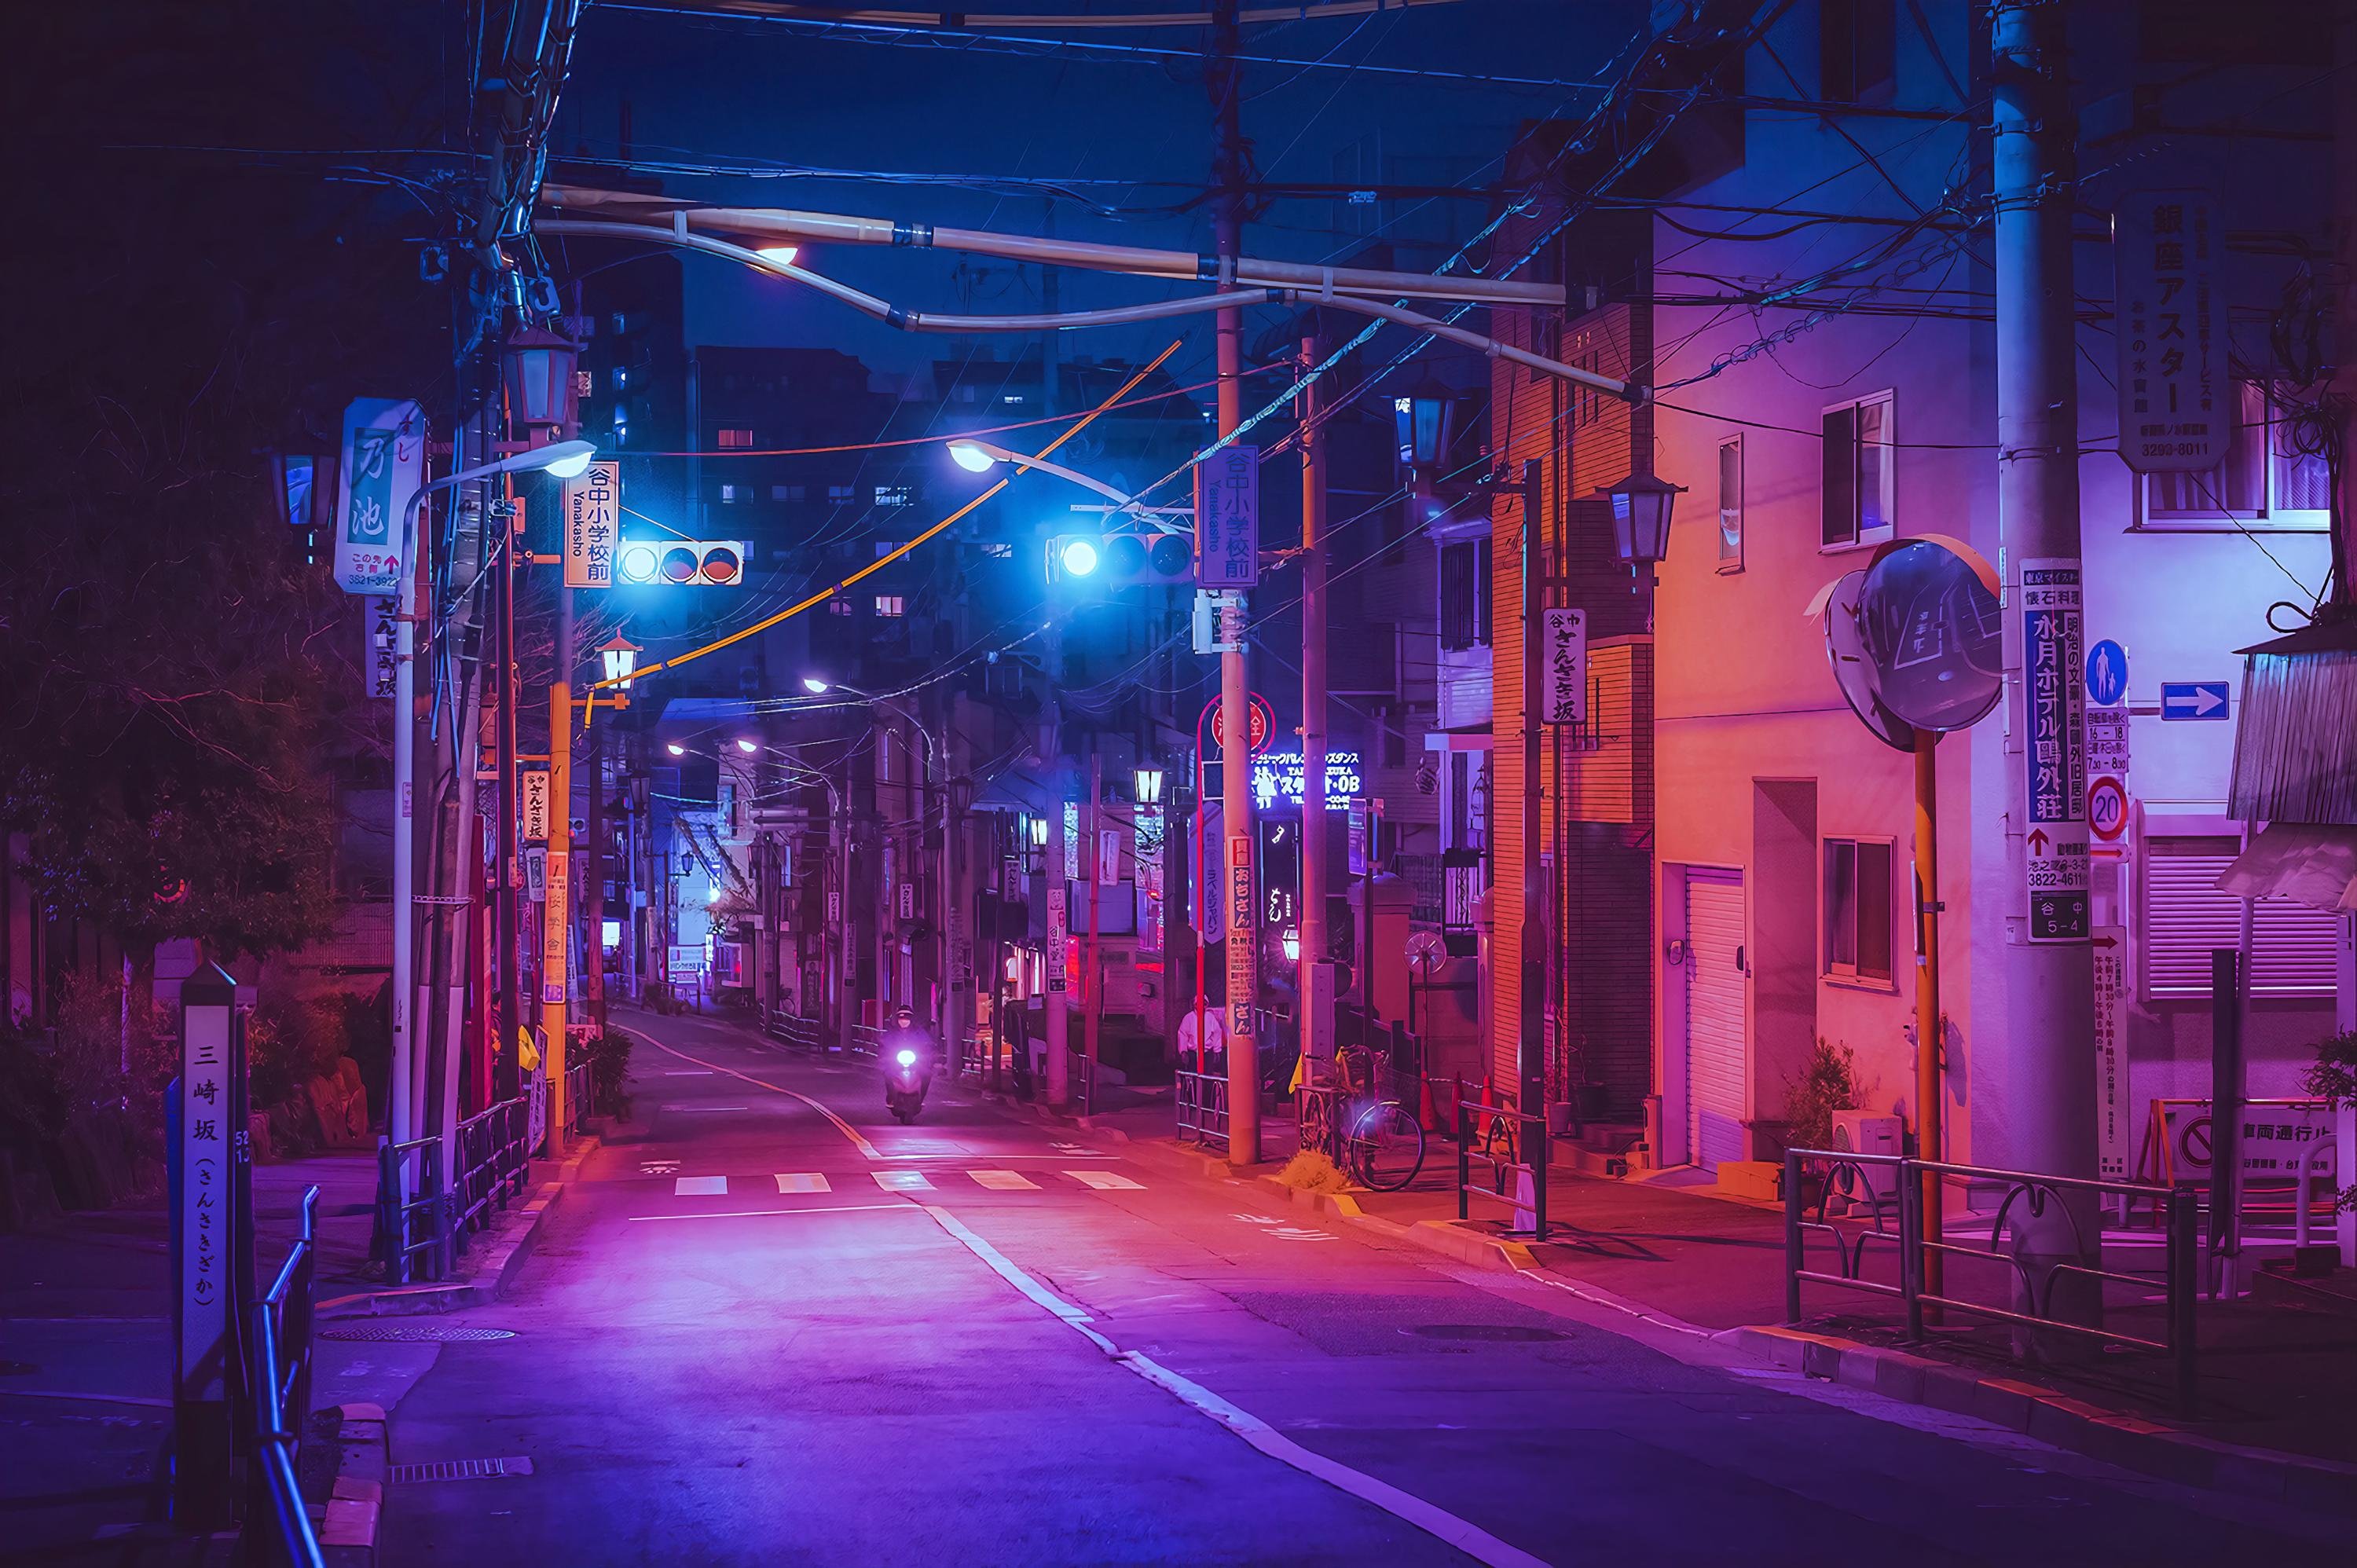 Japanese Street Pictures  Download Free Images on Unsplash